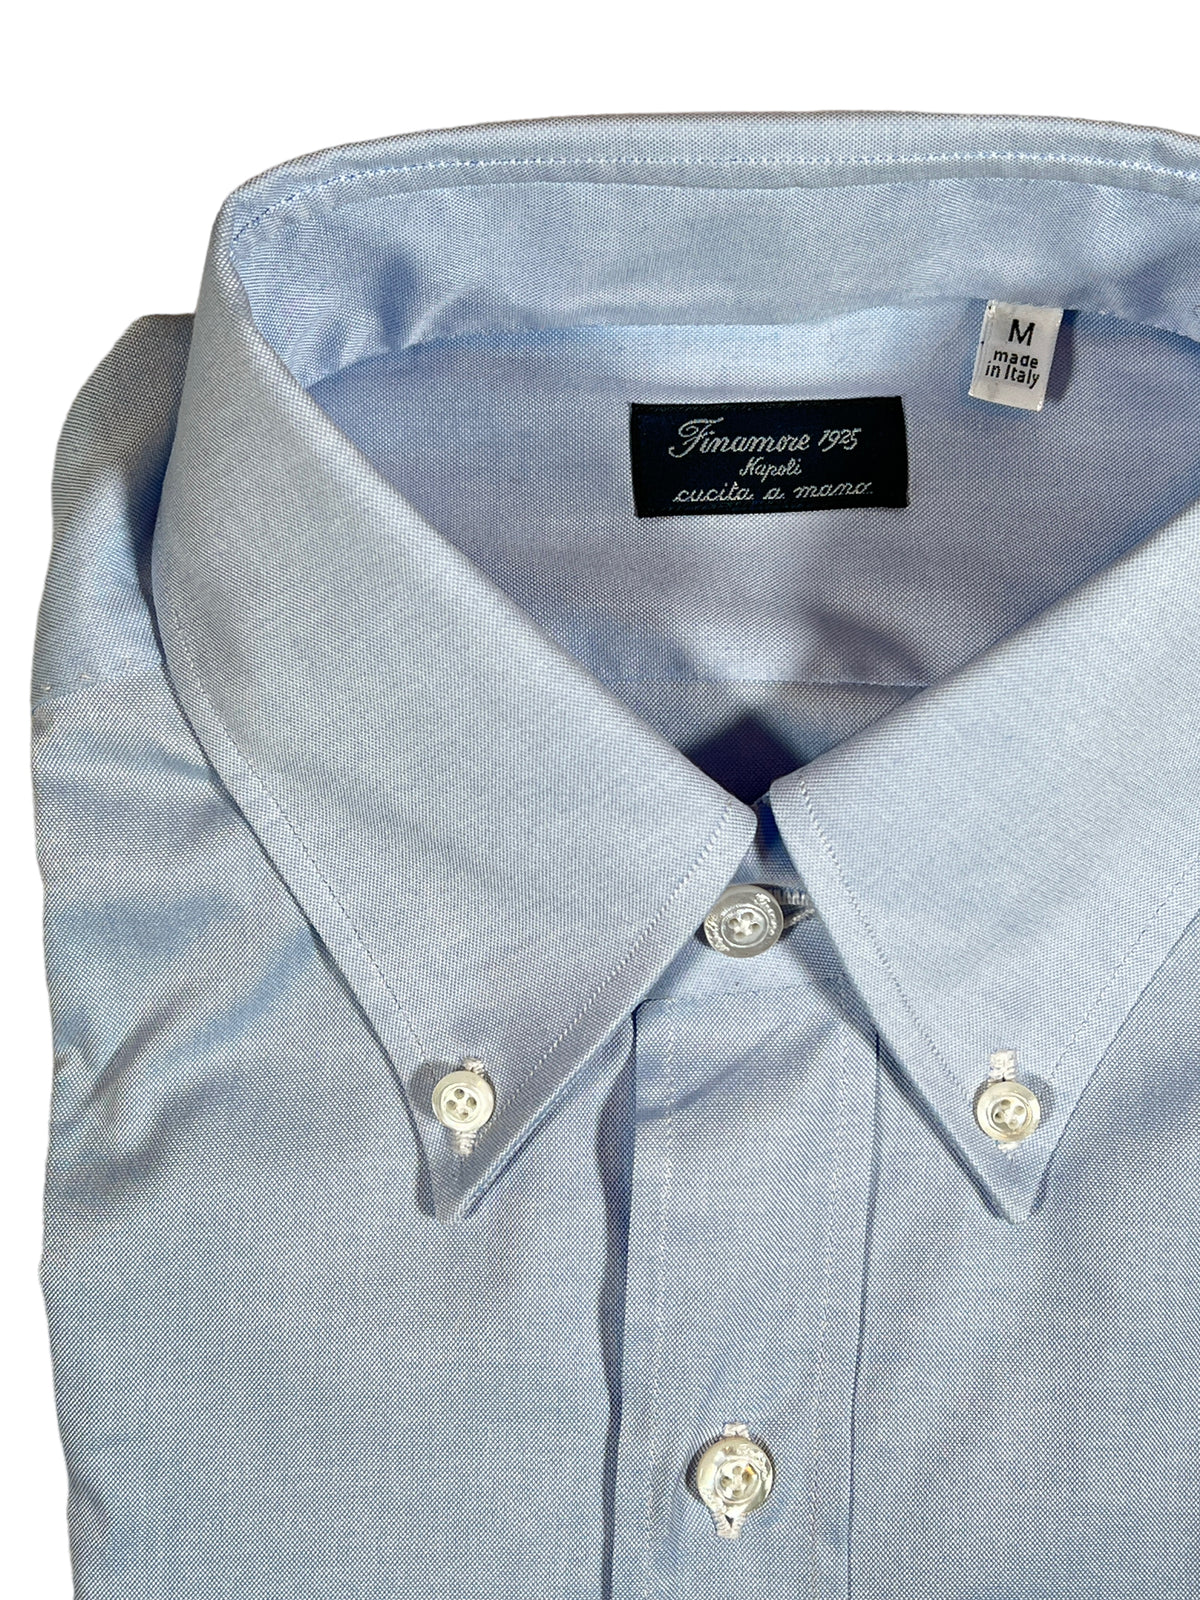 NEW ITEMS FOR MEN – Button Down SF